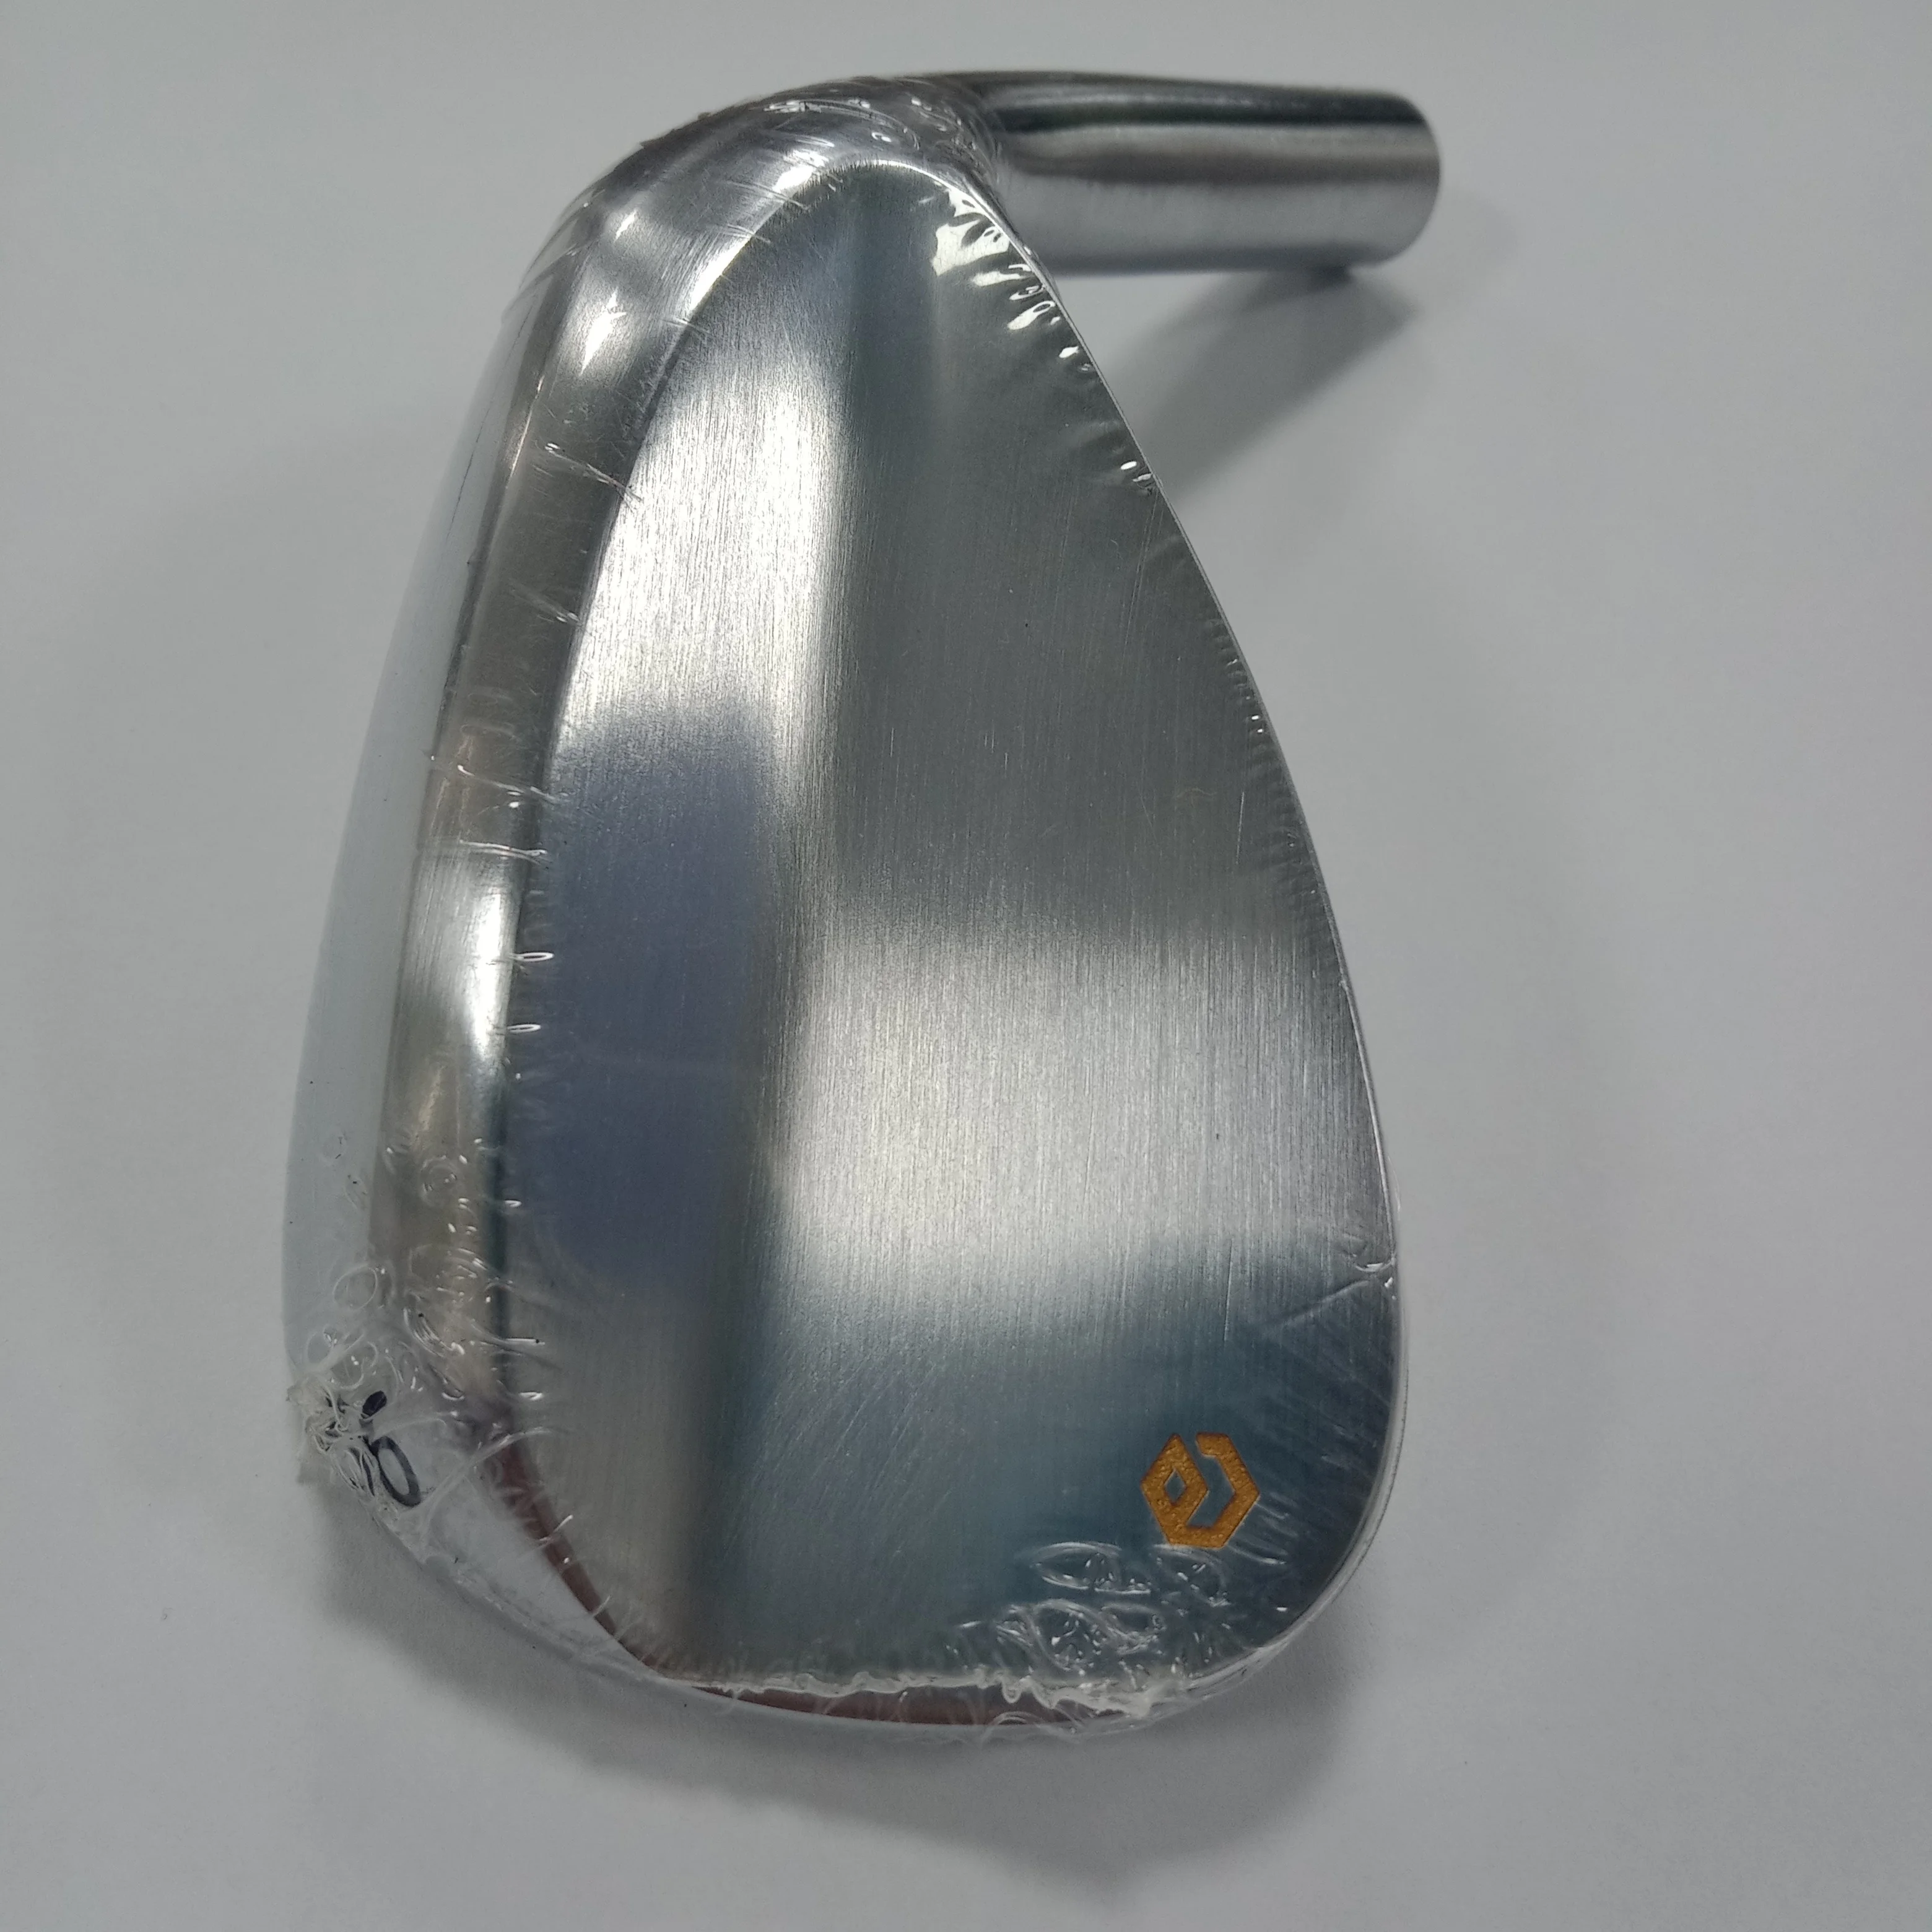 GOLF WEDGES EOPN Forged carbon steel golf wedge head